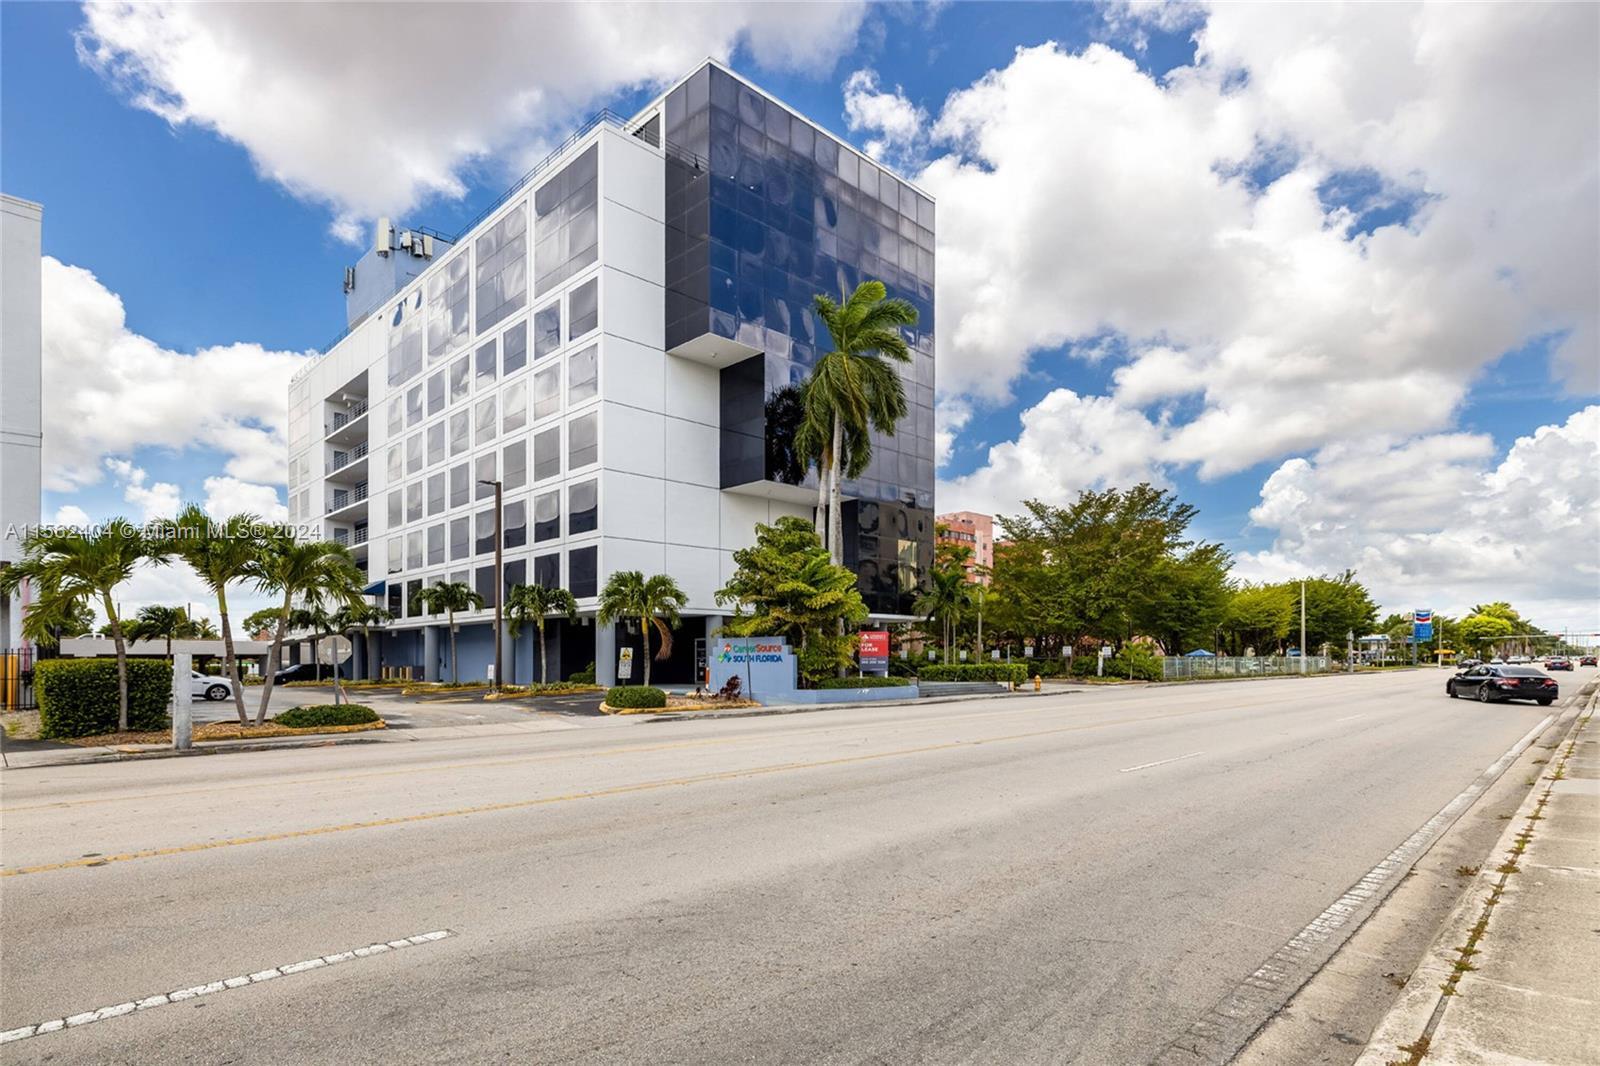 Photo of 5040 NW 7th St #Suite 530 in Miami, FL